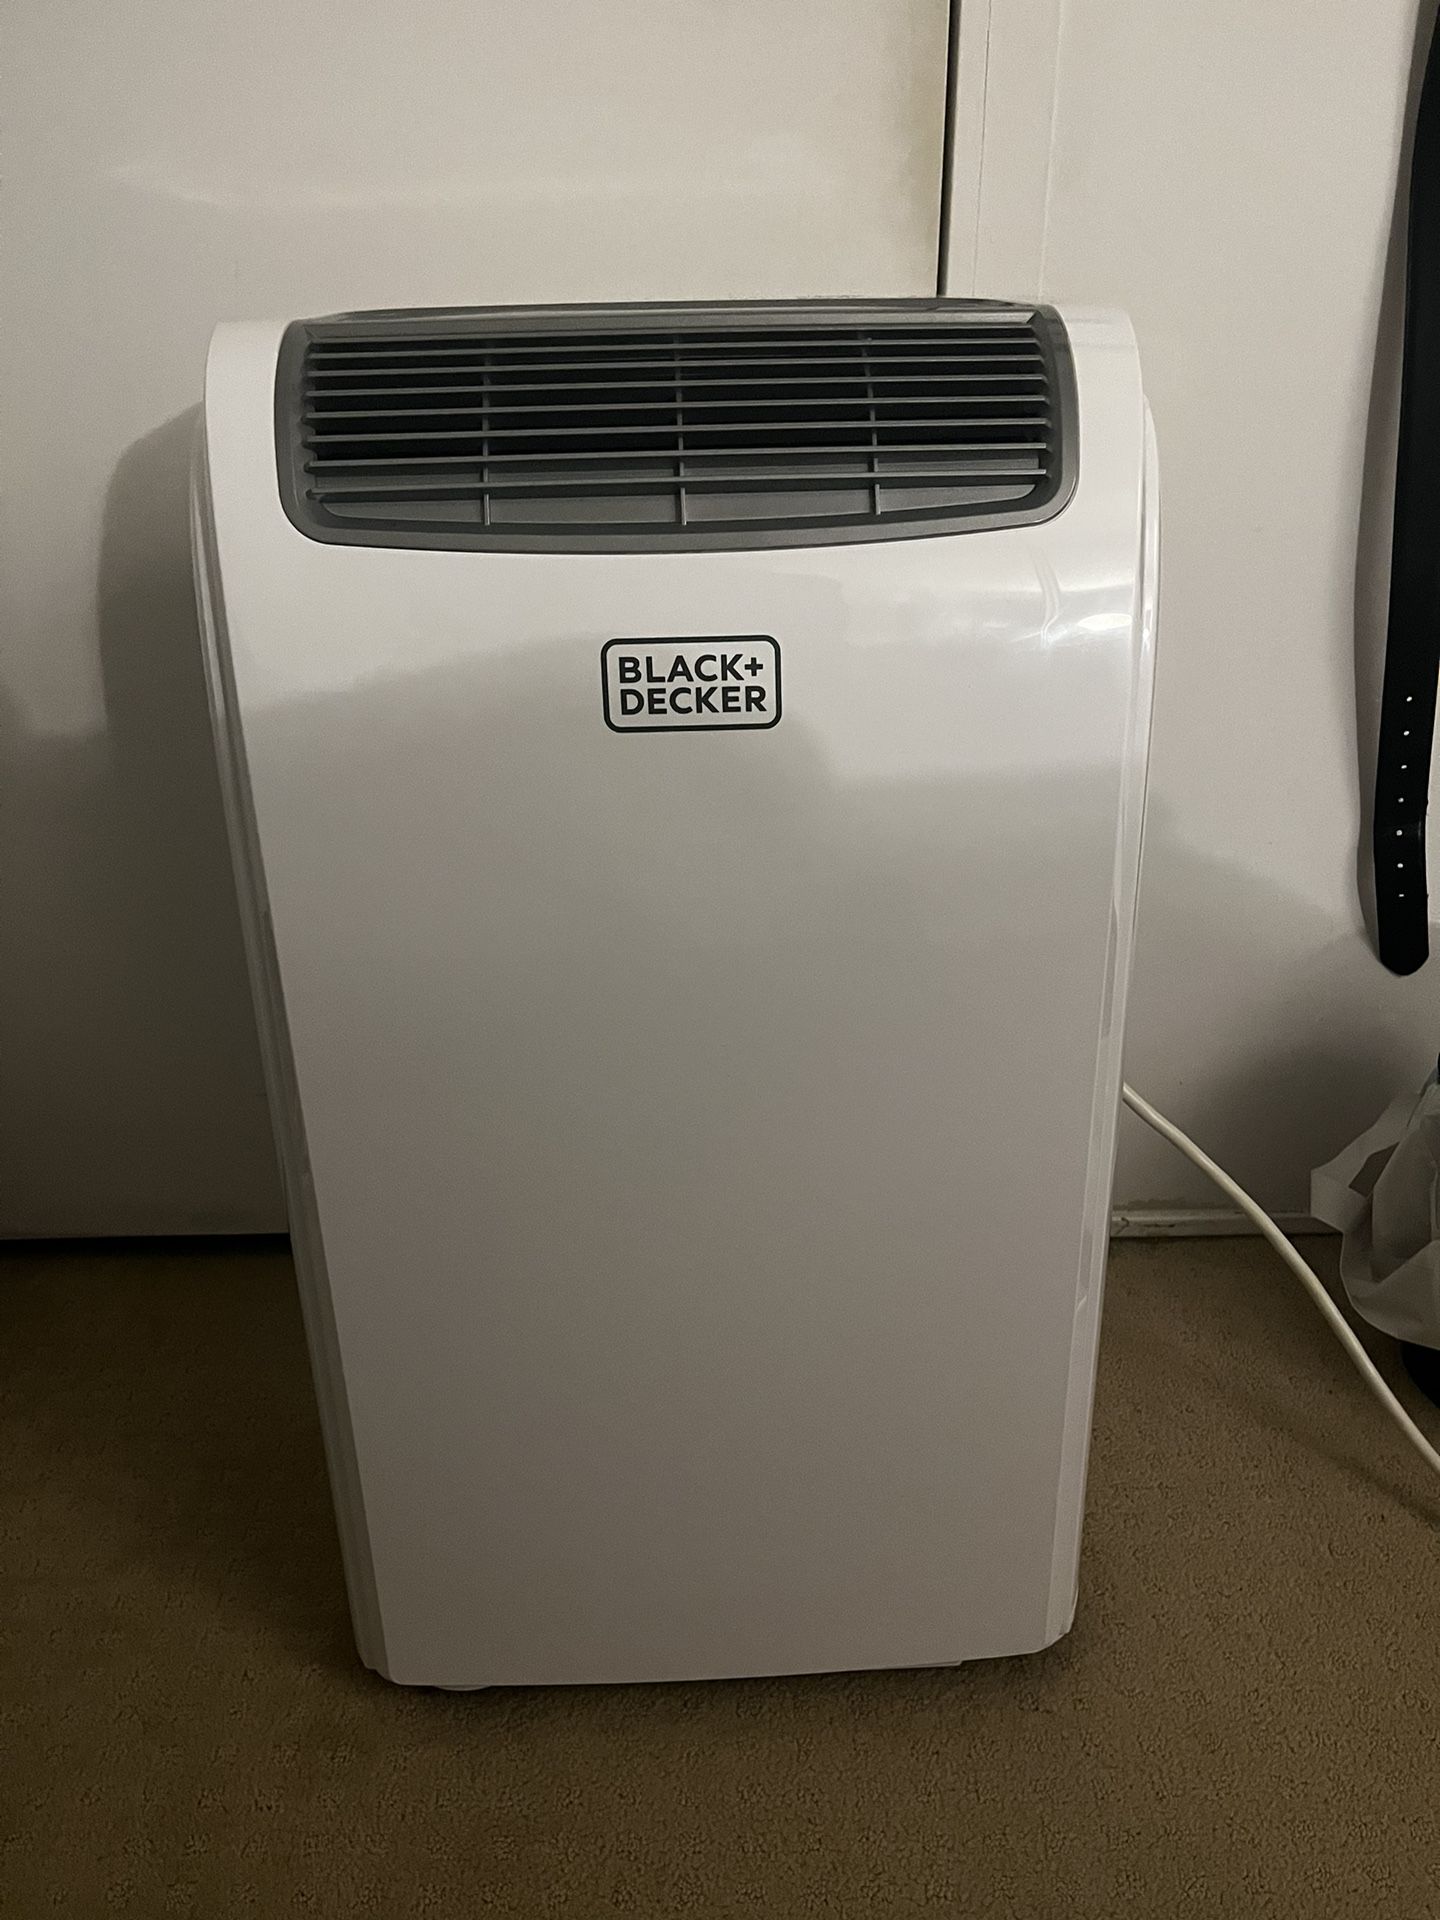 Black and Decker Portable Air Conditioner for Sale in Anaheim, CA